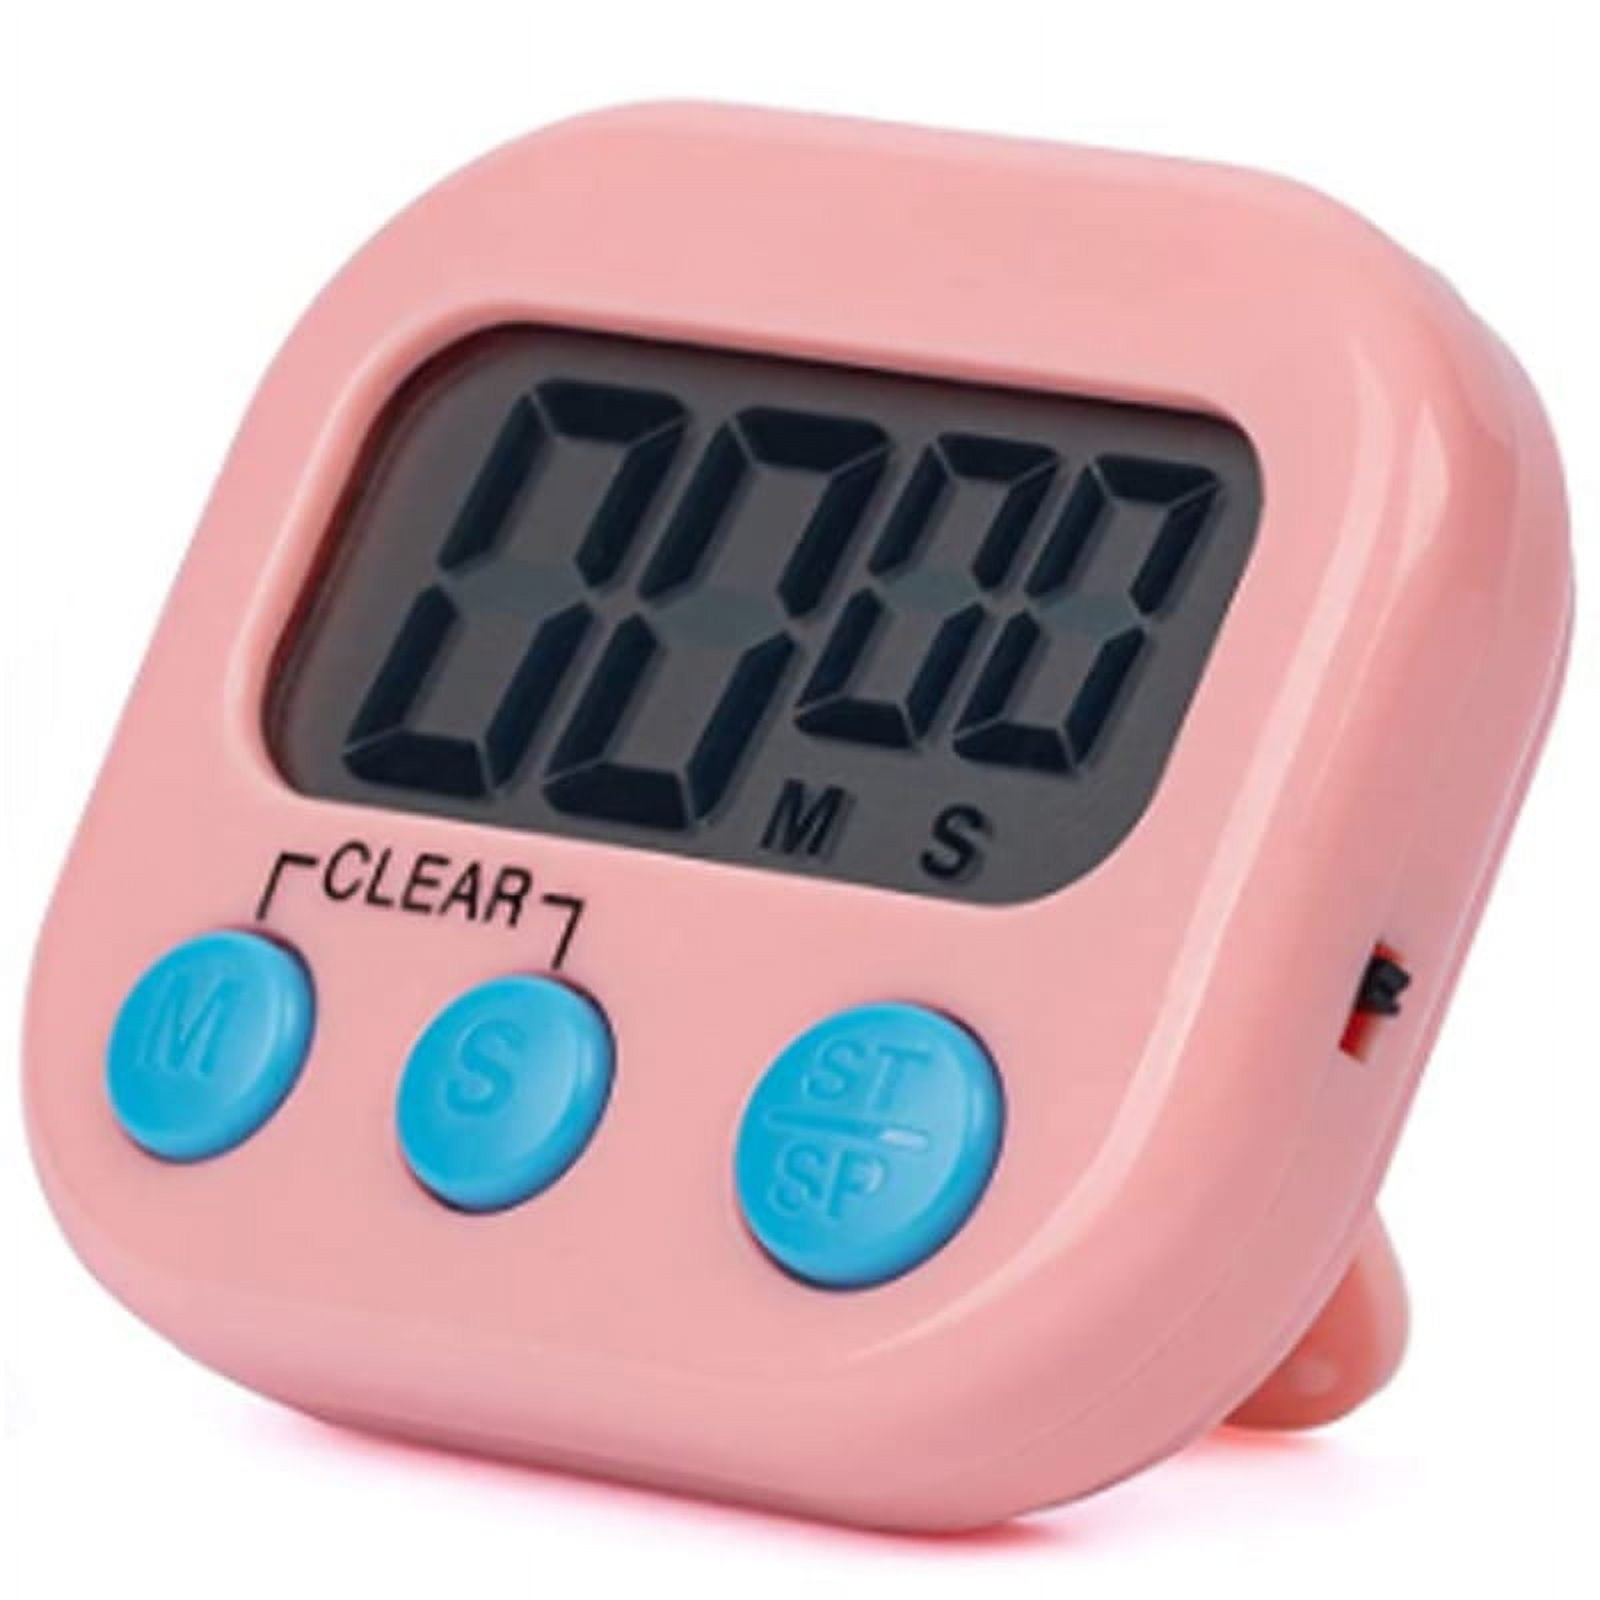 Count Down Timer – LCD Display Countdown Timer, Maximum Countdown